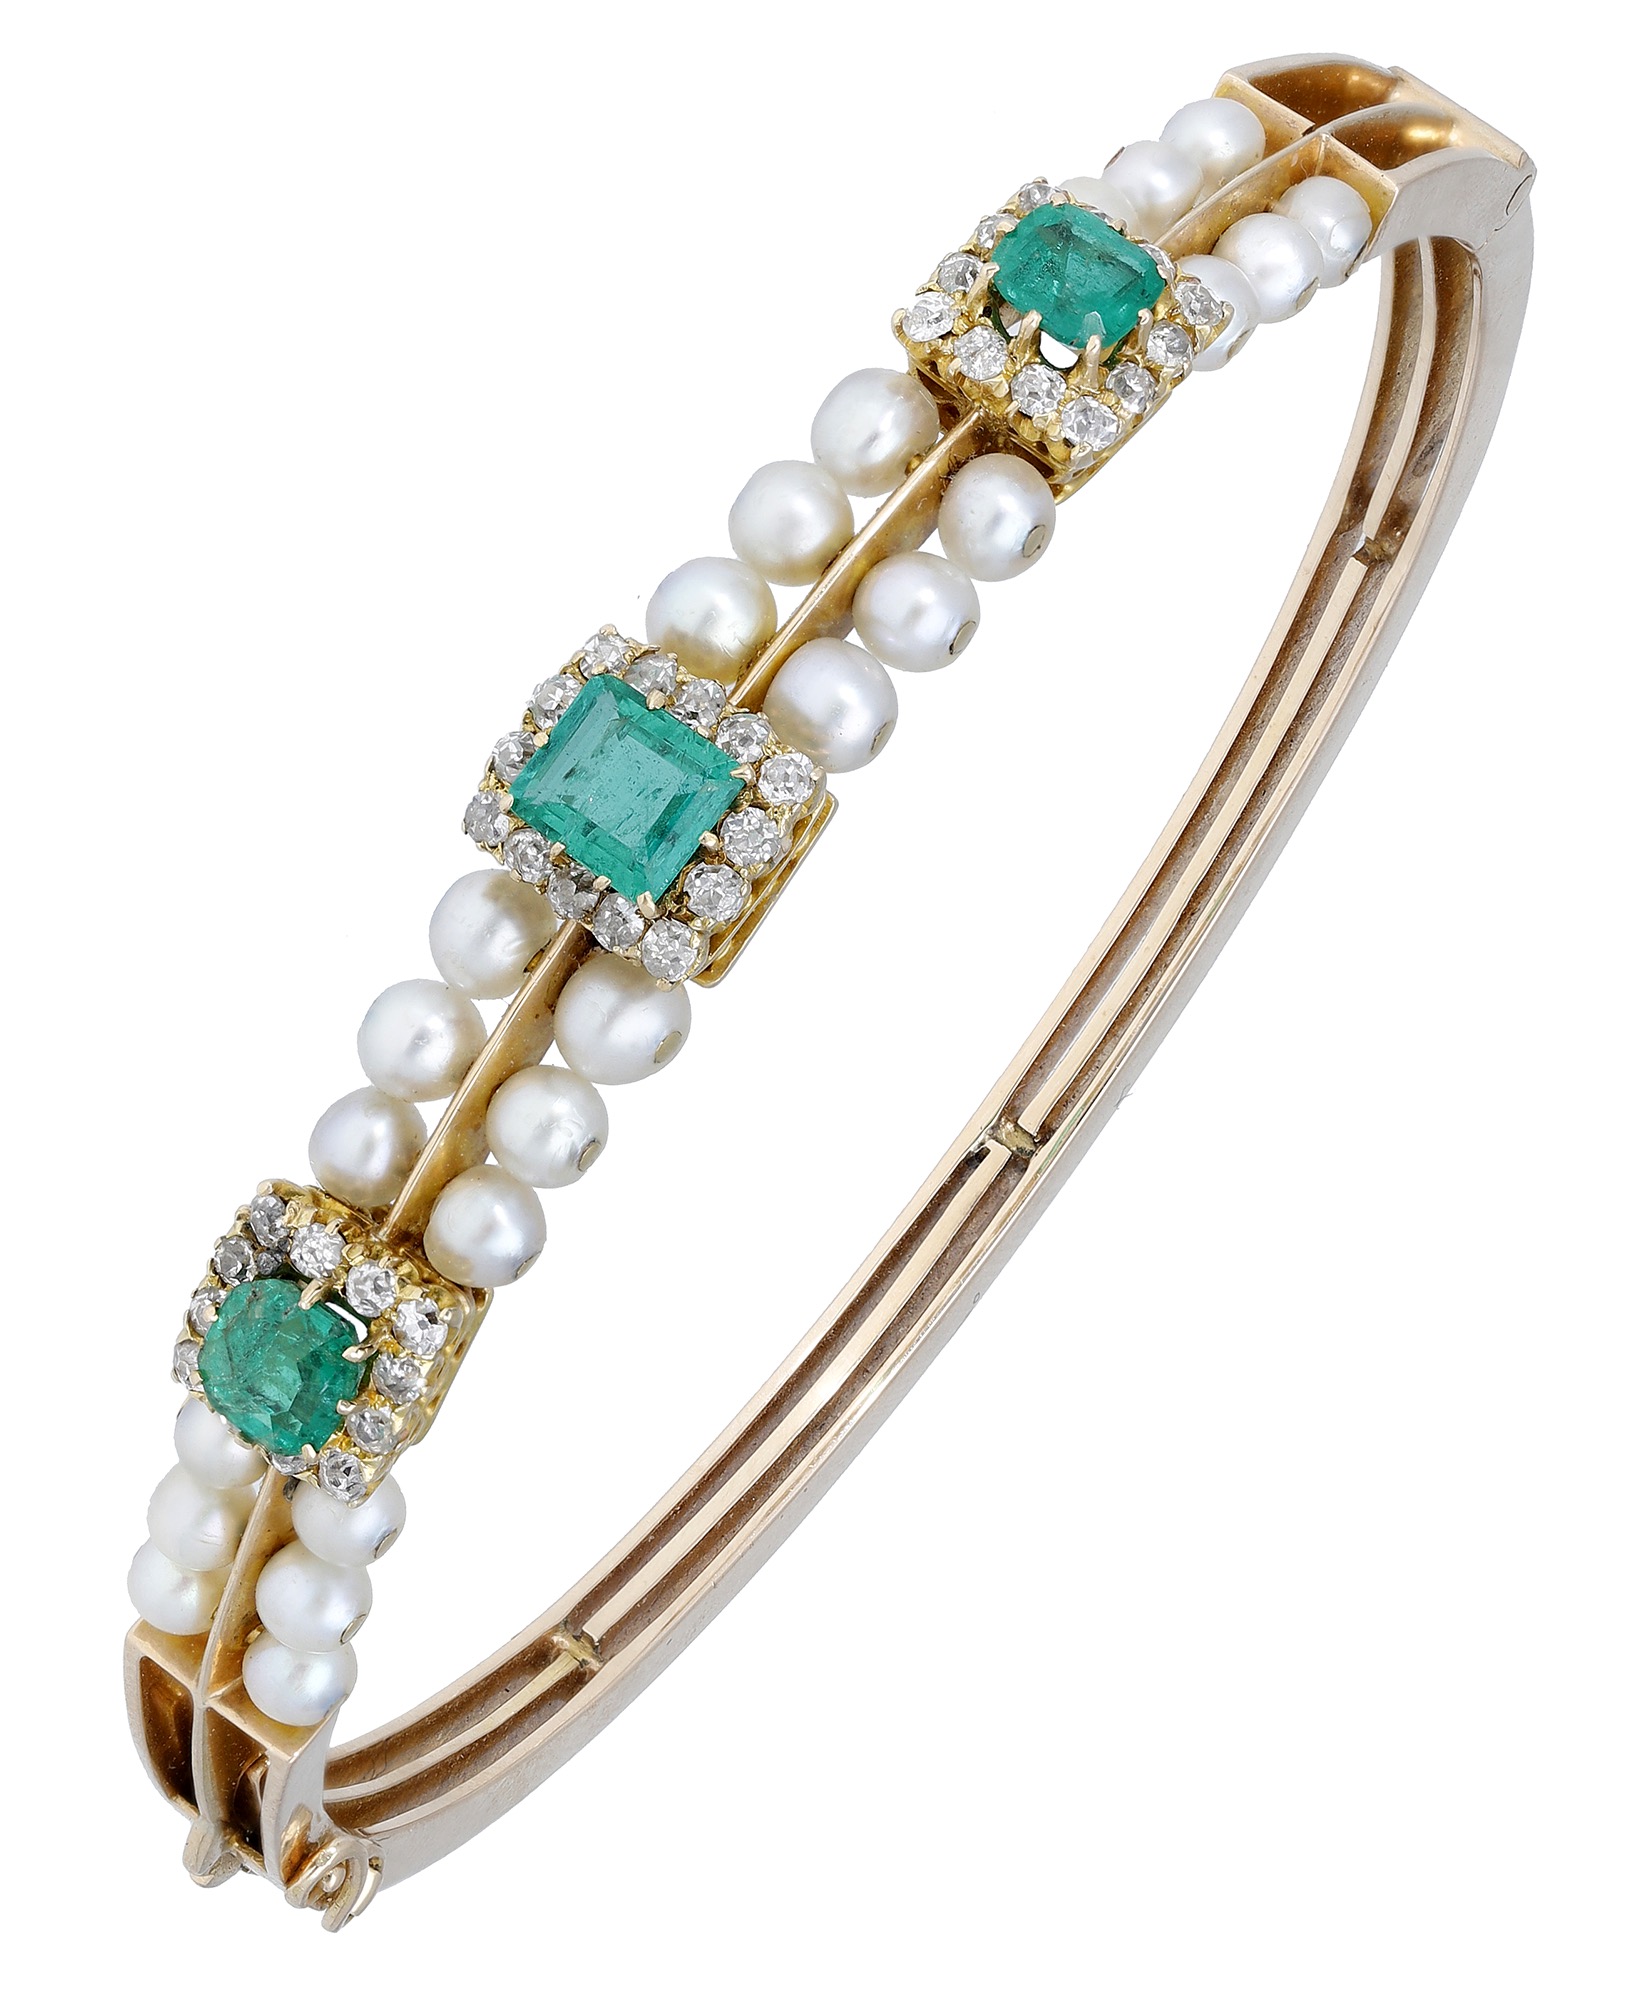 A late 19th century emerald and pearl bangle, set to the front with a central step-cut emera...